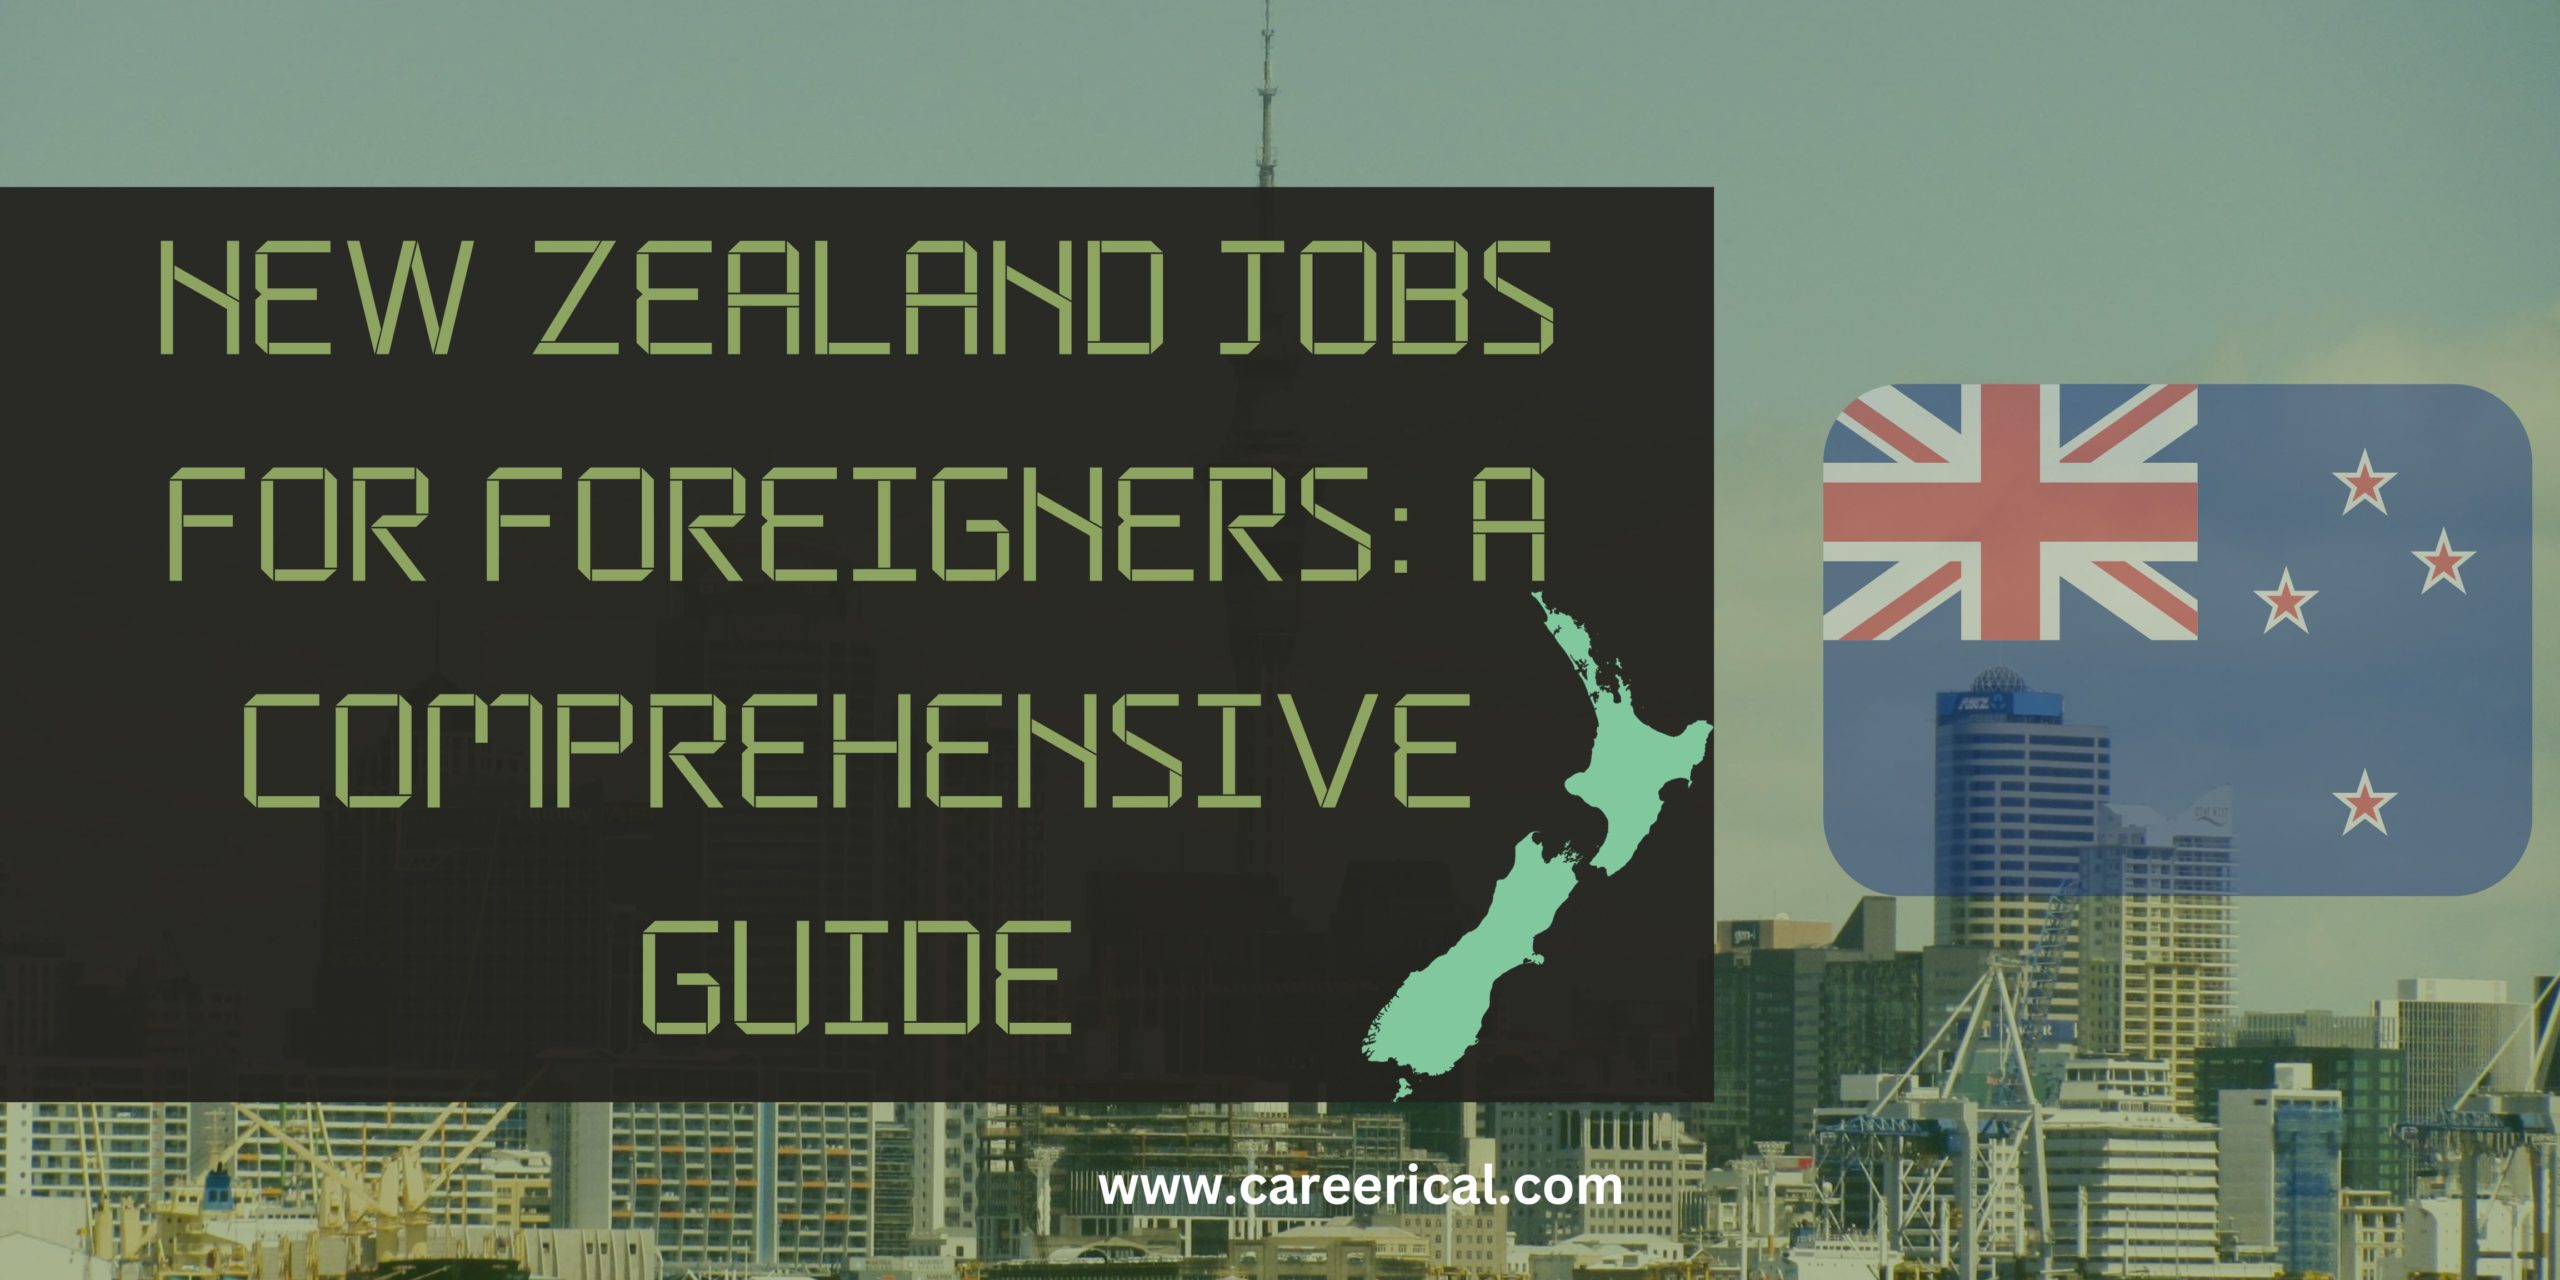 🇳🇿 New Zealand Jobs for Foreigners A Comprehensive Guide Careerical